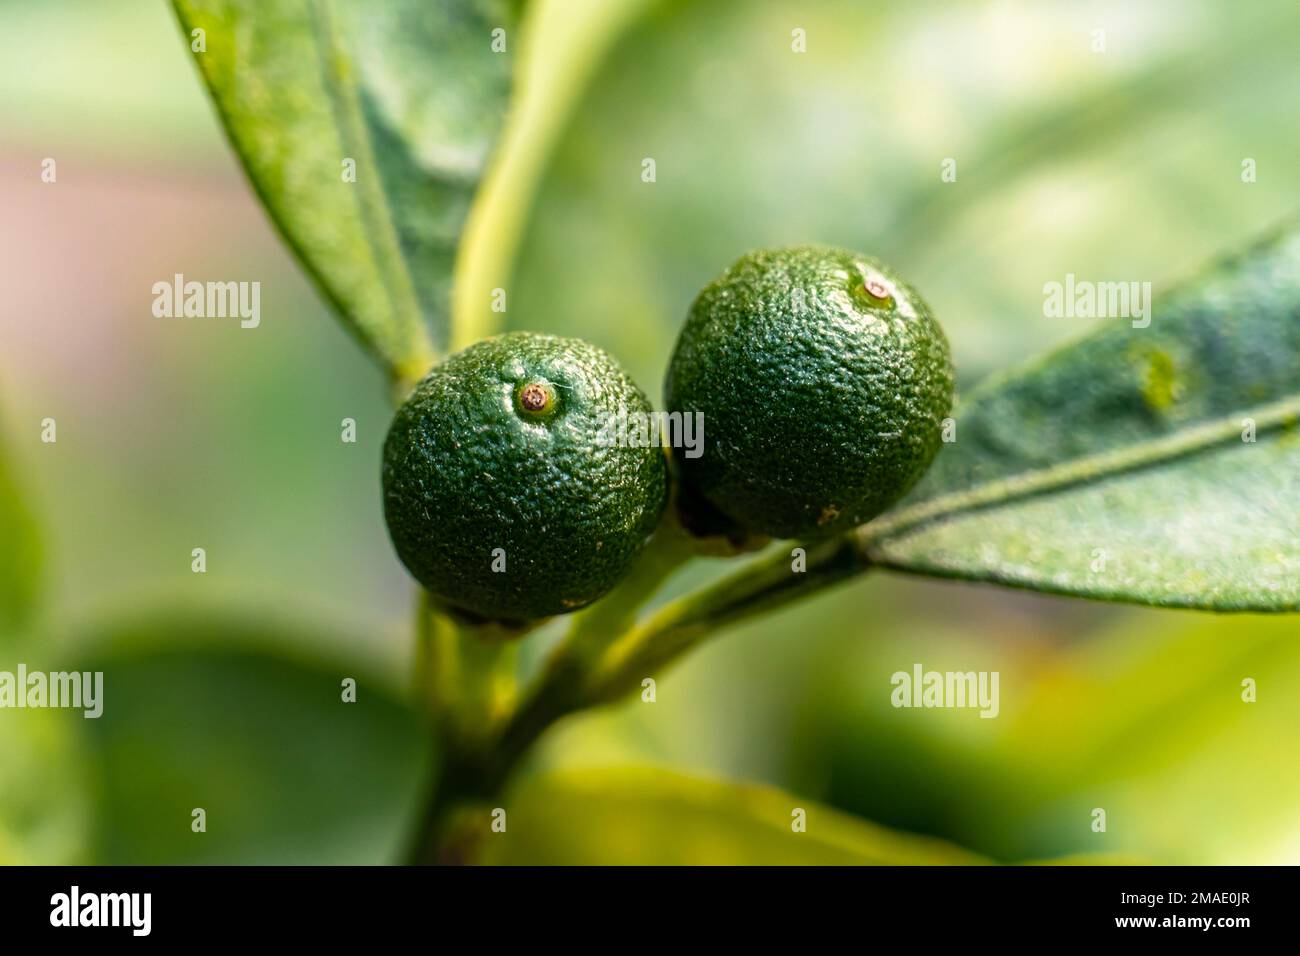 Two small lemon hanging on the tree. The lemon (Citrus limon) is a species of small evergreen trees in the flowering plant family Rutaceae. Stock Photo